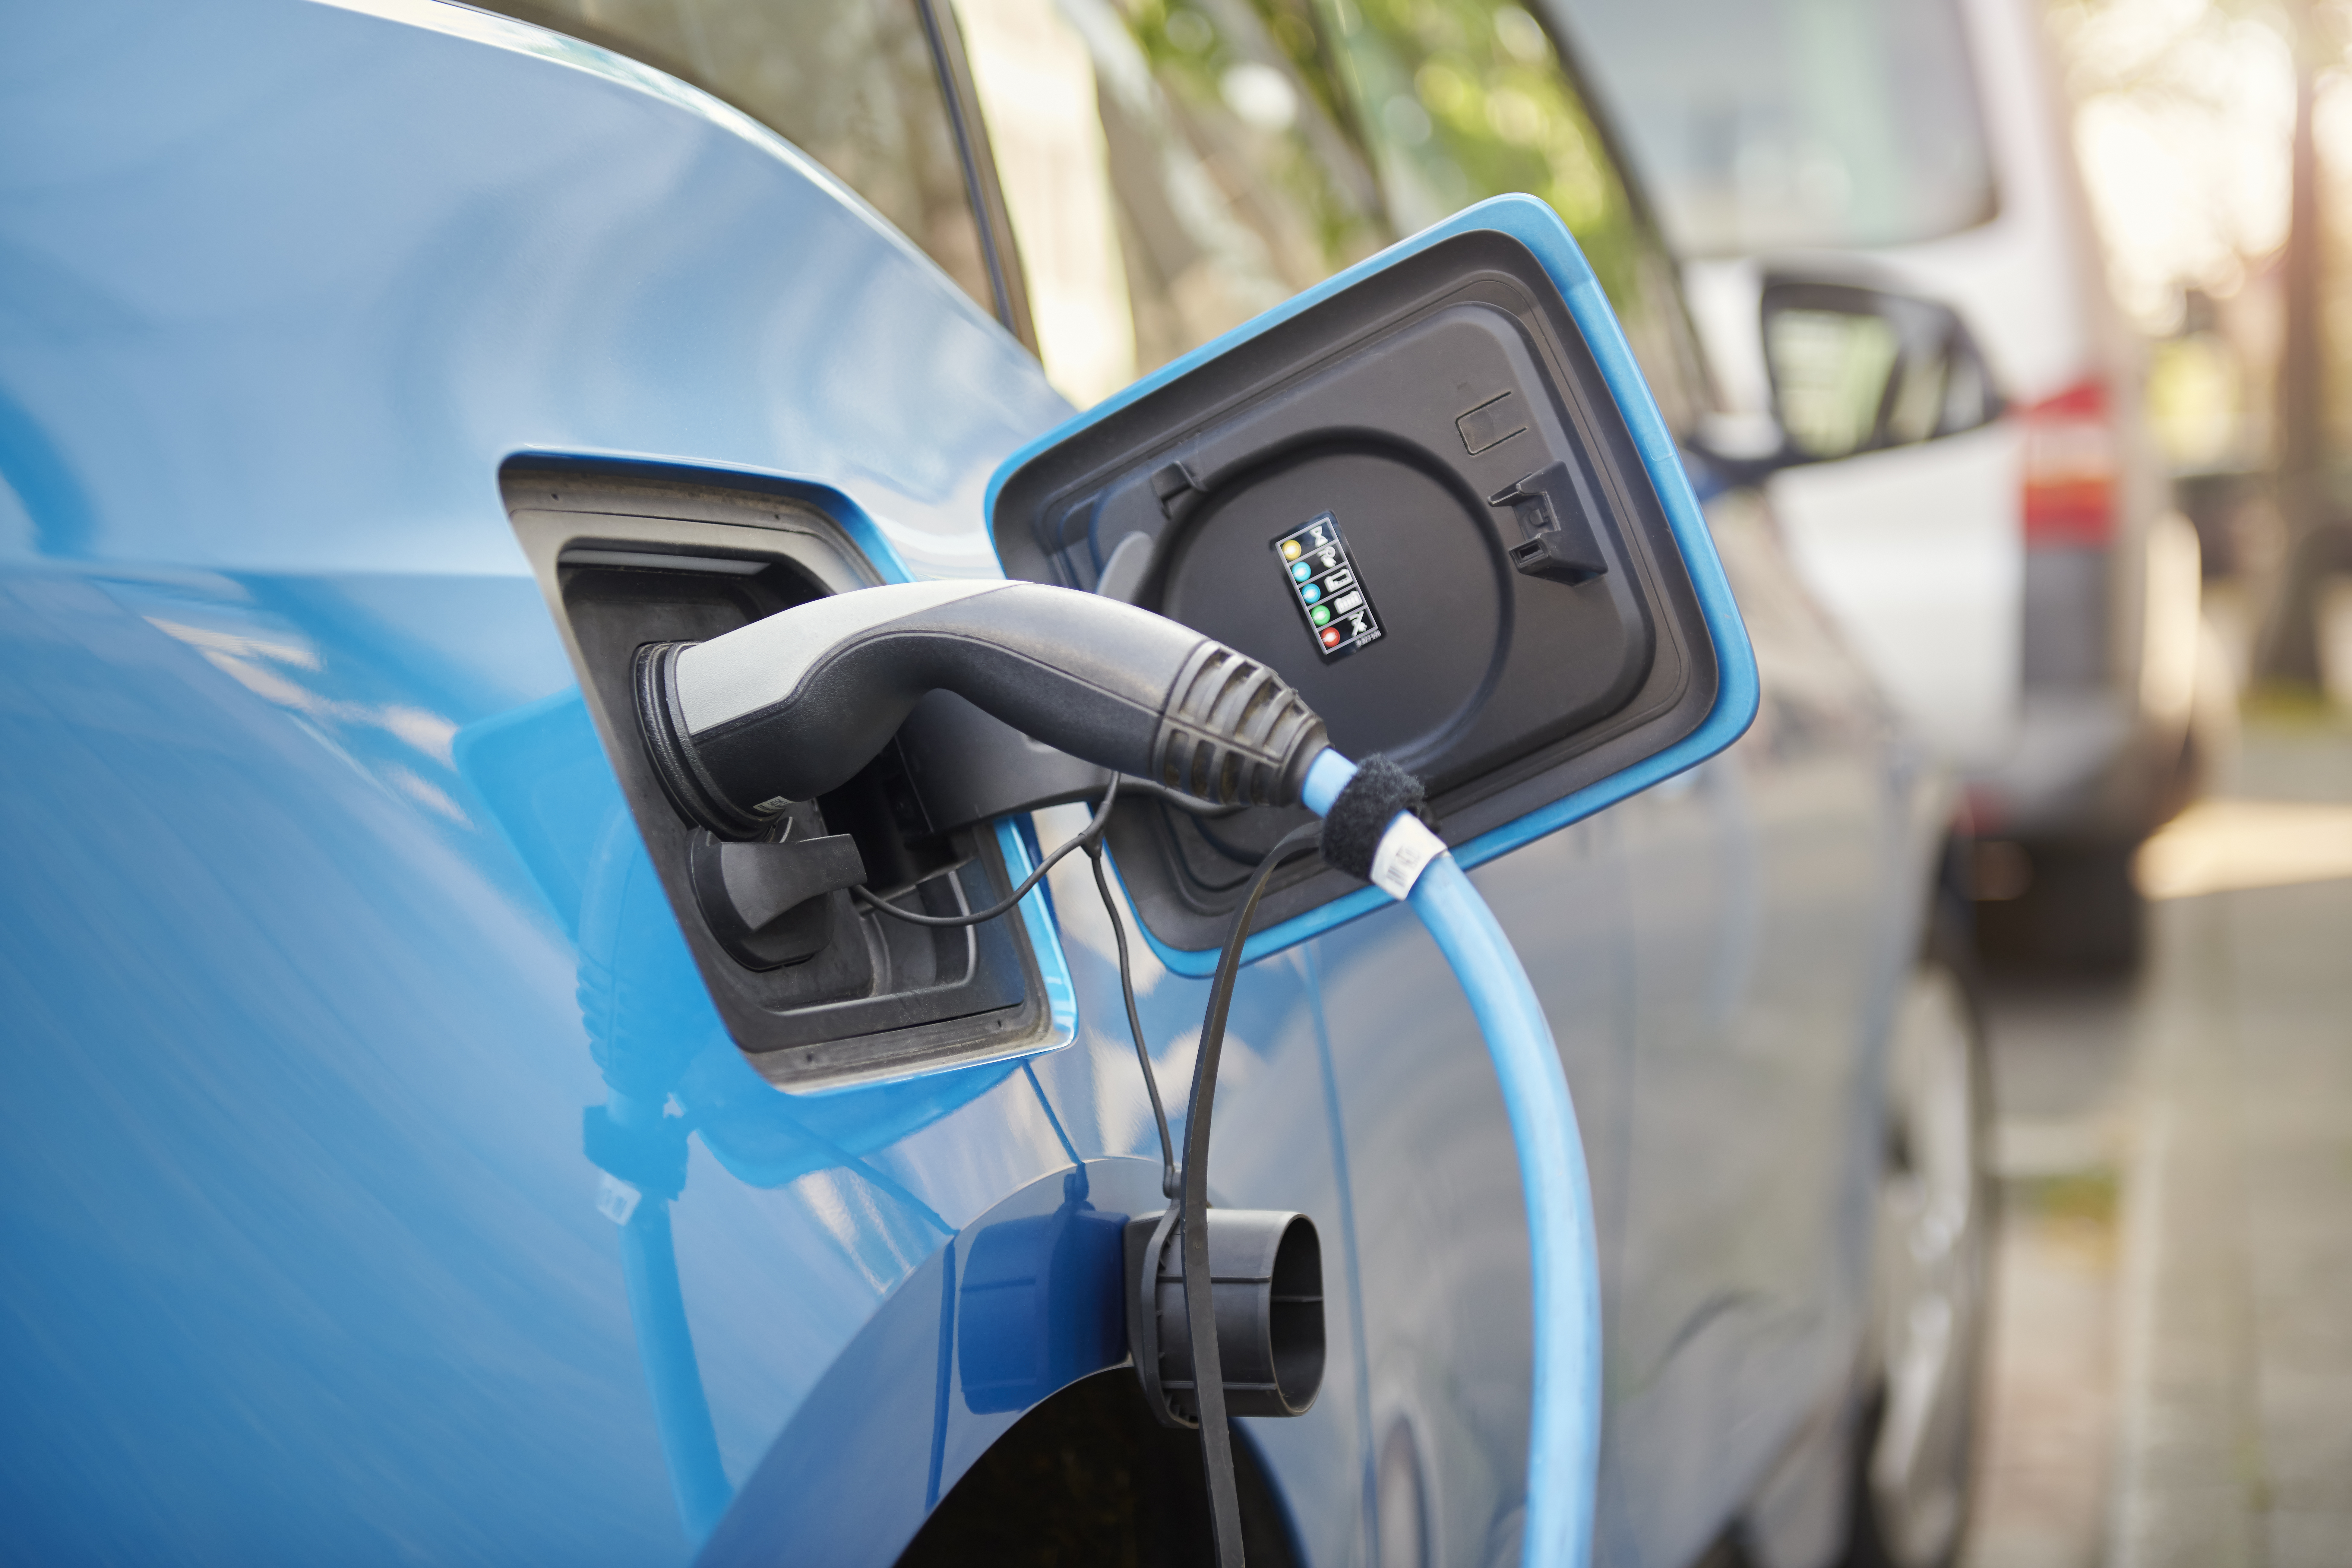 Security flaws found in popular EV chargers